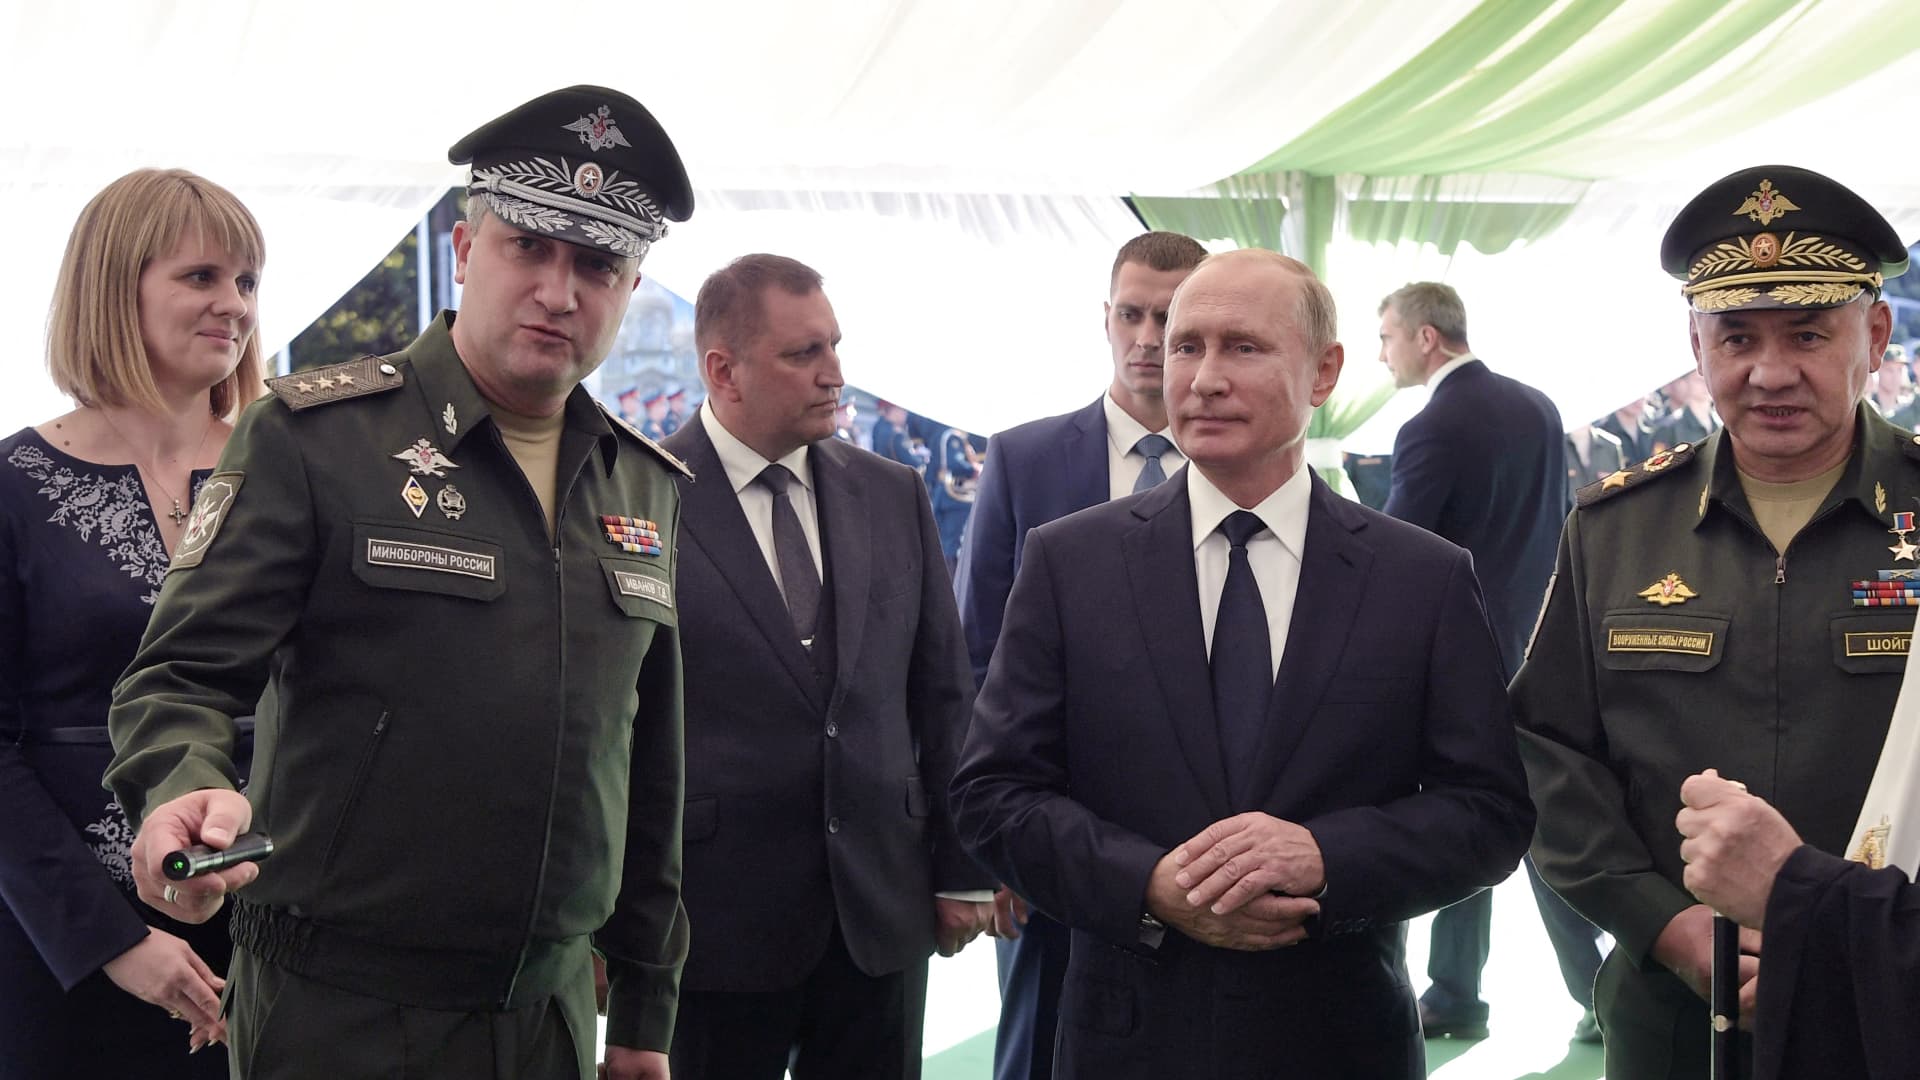 In this pool photograph distributed by Russian state owned agency Sputnik, Russia's President Vladimir Putin (C), Russian Defence Minister Sergei Shoigu (R) and Deputy Minister of Defense of the Russian Federation Timur Ivanov (L) visit the military Patriot Park in Kubinka, outside Moscow, on September 19, 2018. Russian law enforcement have detained Deputy Defence Minister Timur Ivanov on suspicion of taking bribes, Russia's Investigative Committee said on April 23, 2024. 